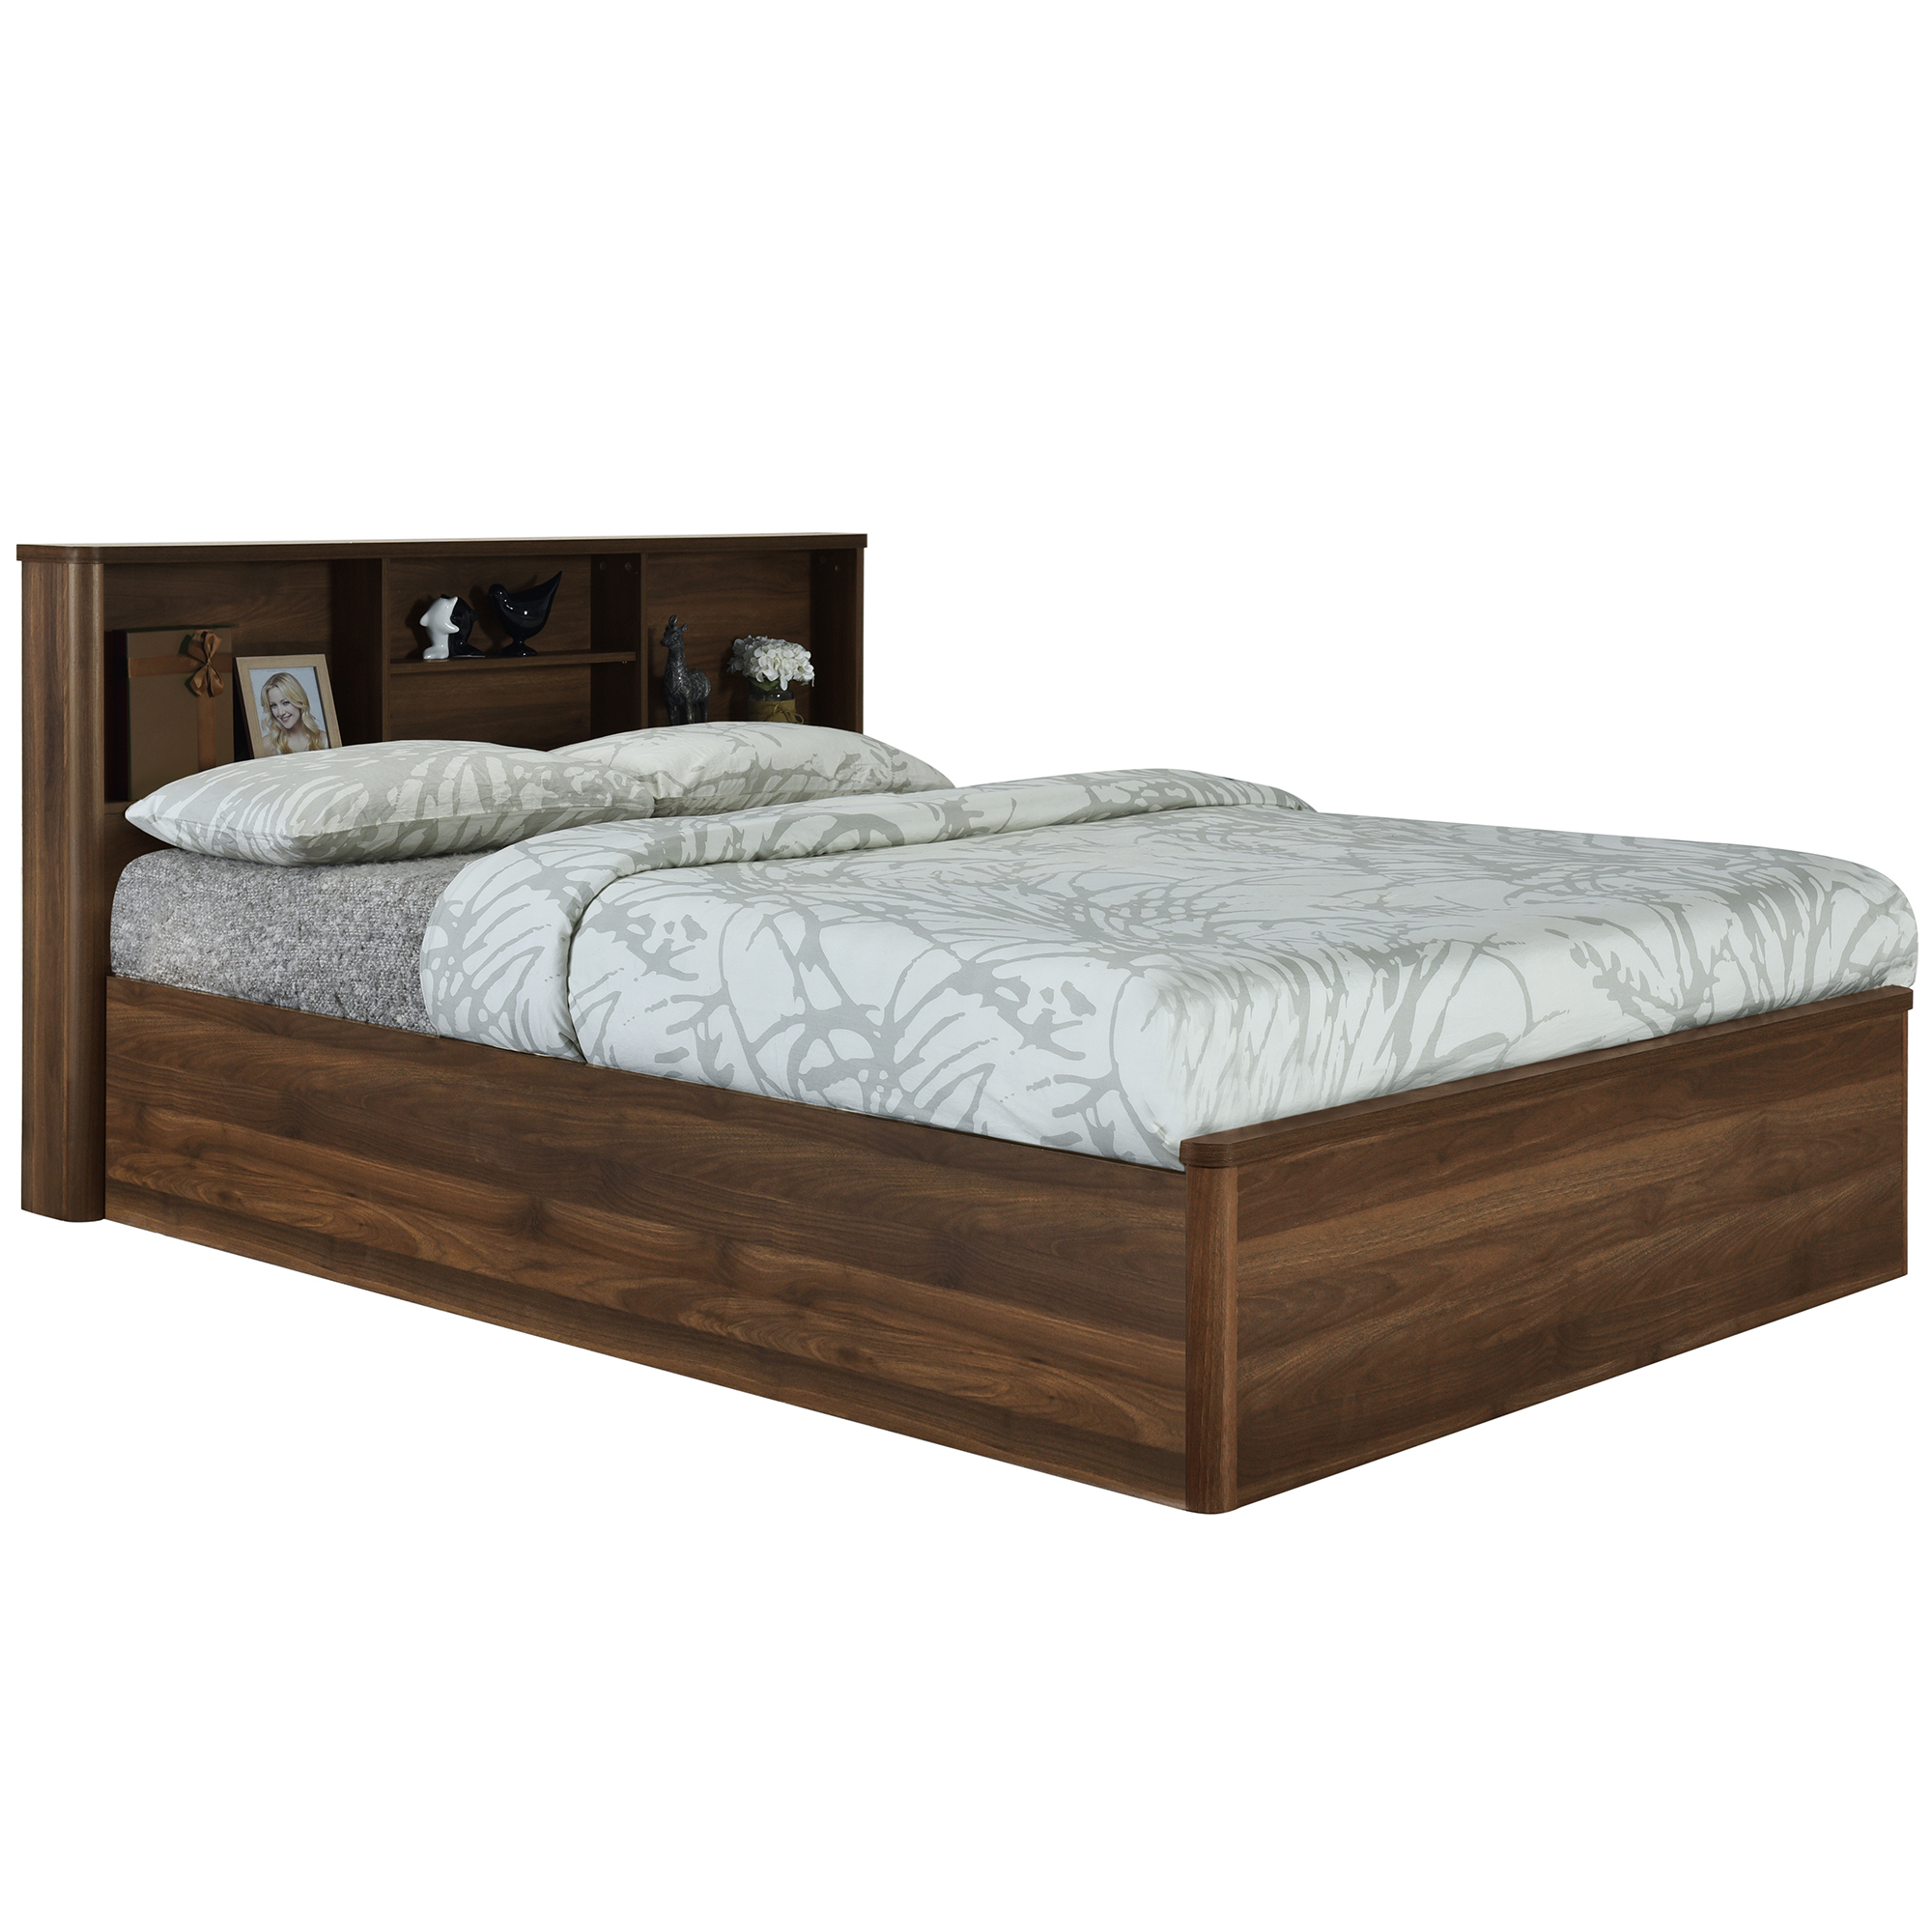 Core Living Anderson Queen Bed With, King Single Bed With Bookcase Bedhead